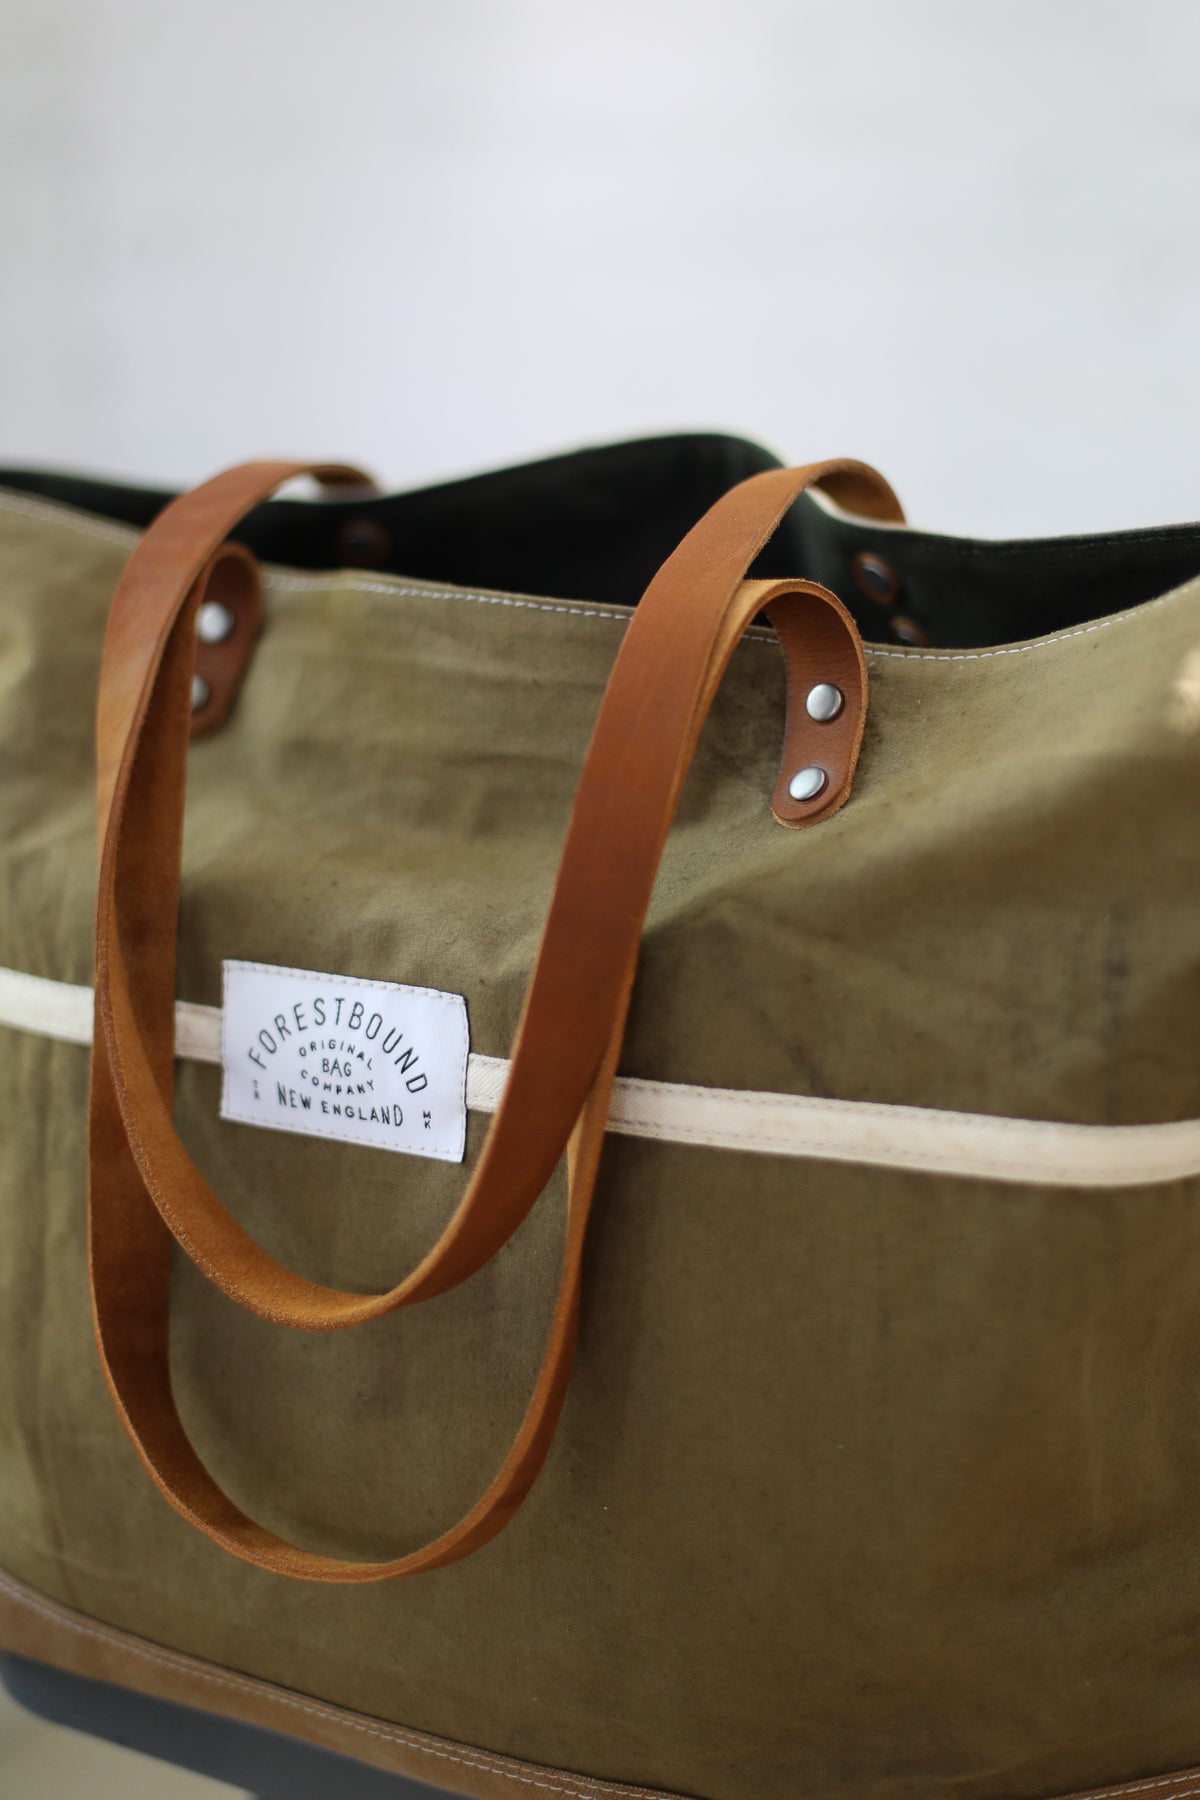 1950's era Salvaged Canvas and Work Apron Tote Bag